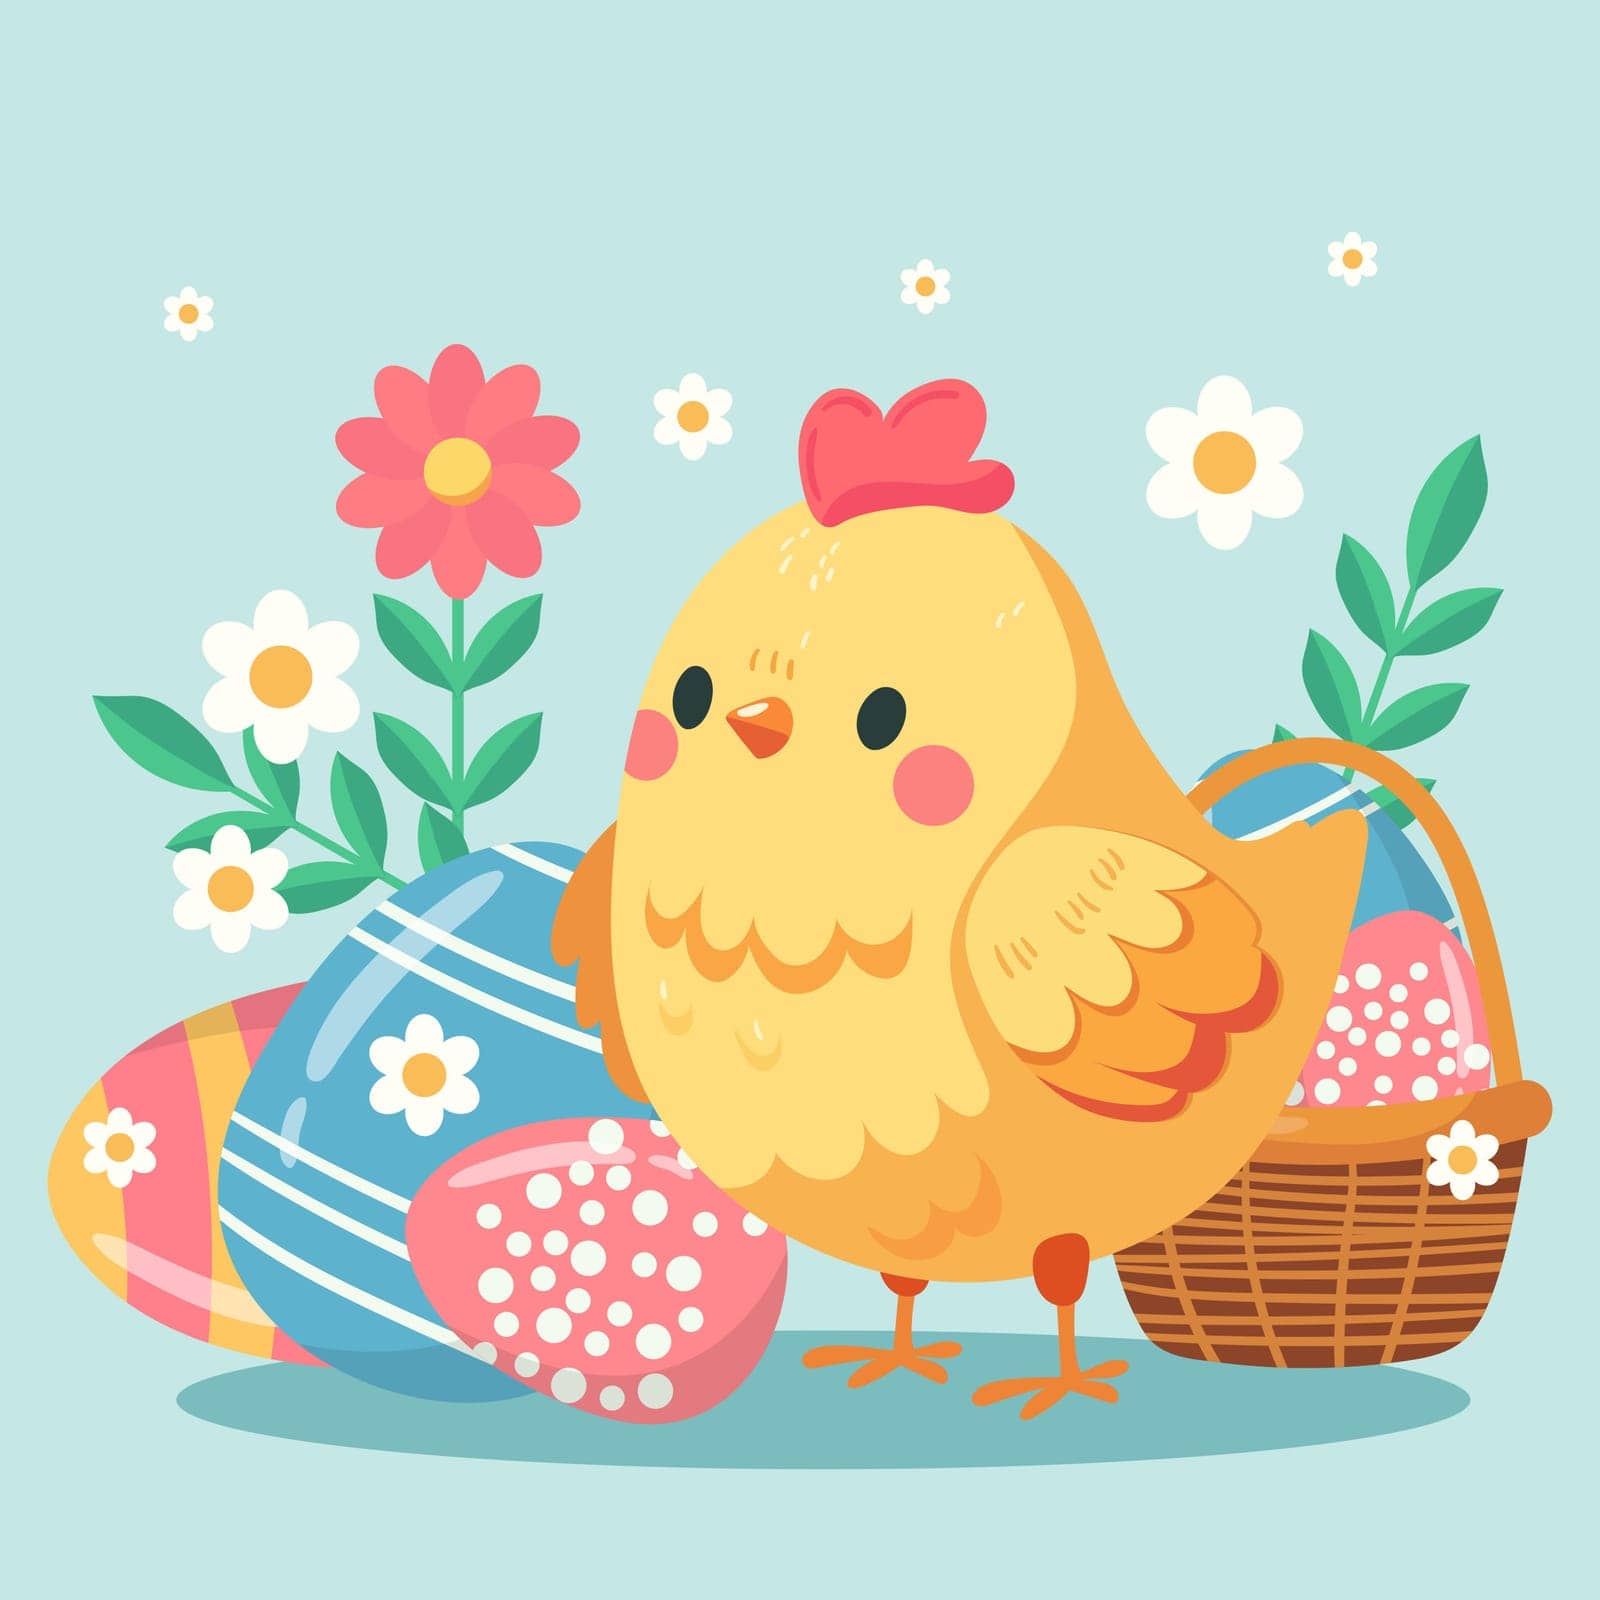 Happy easter card with chicken and eggs flat style by BagelHelen